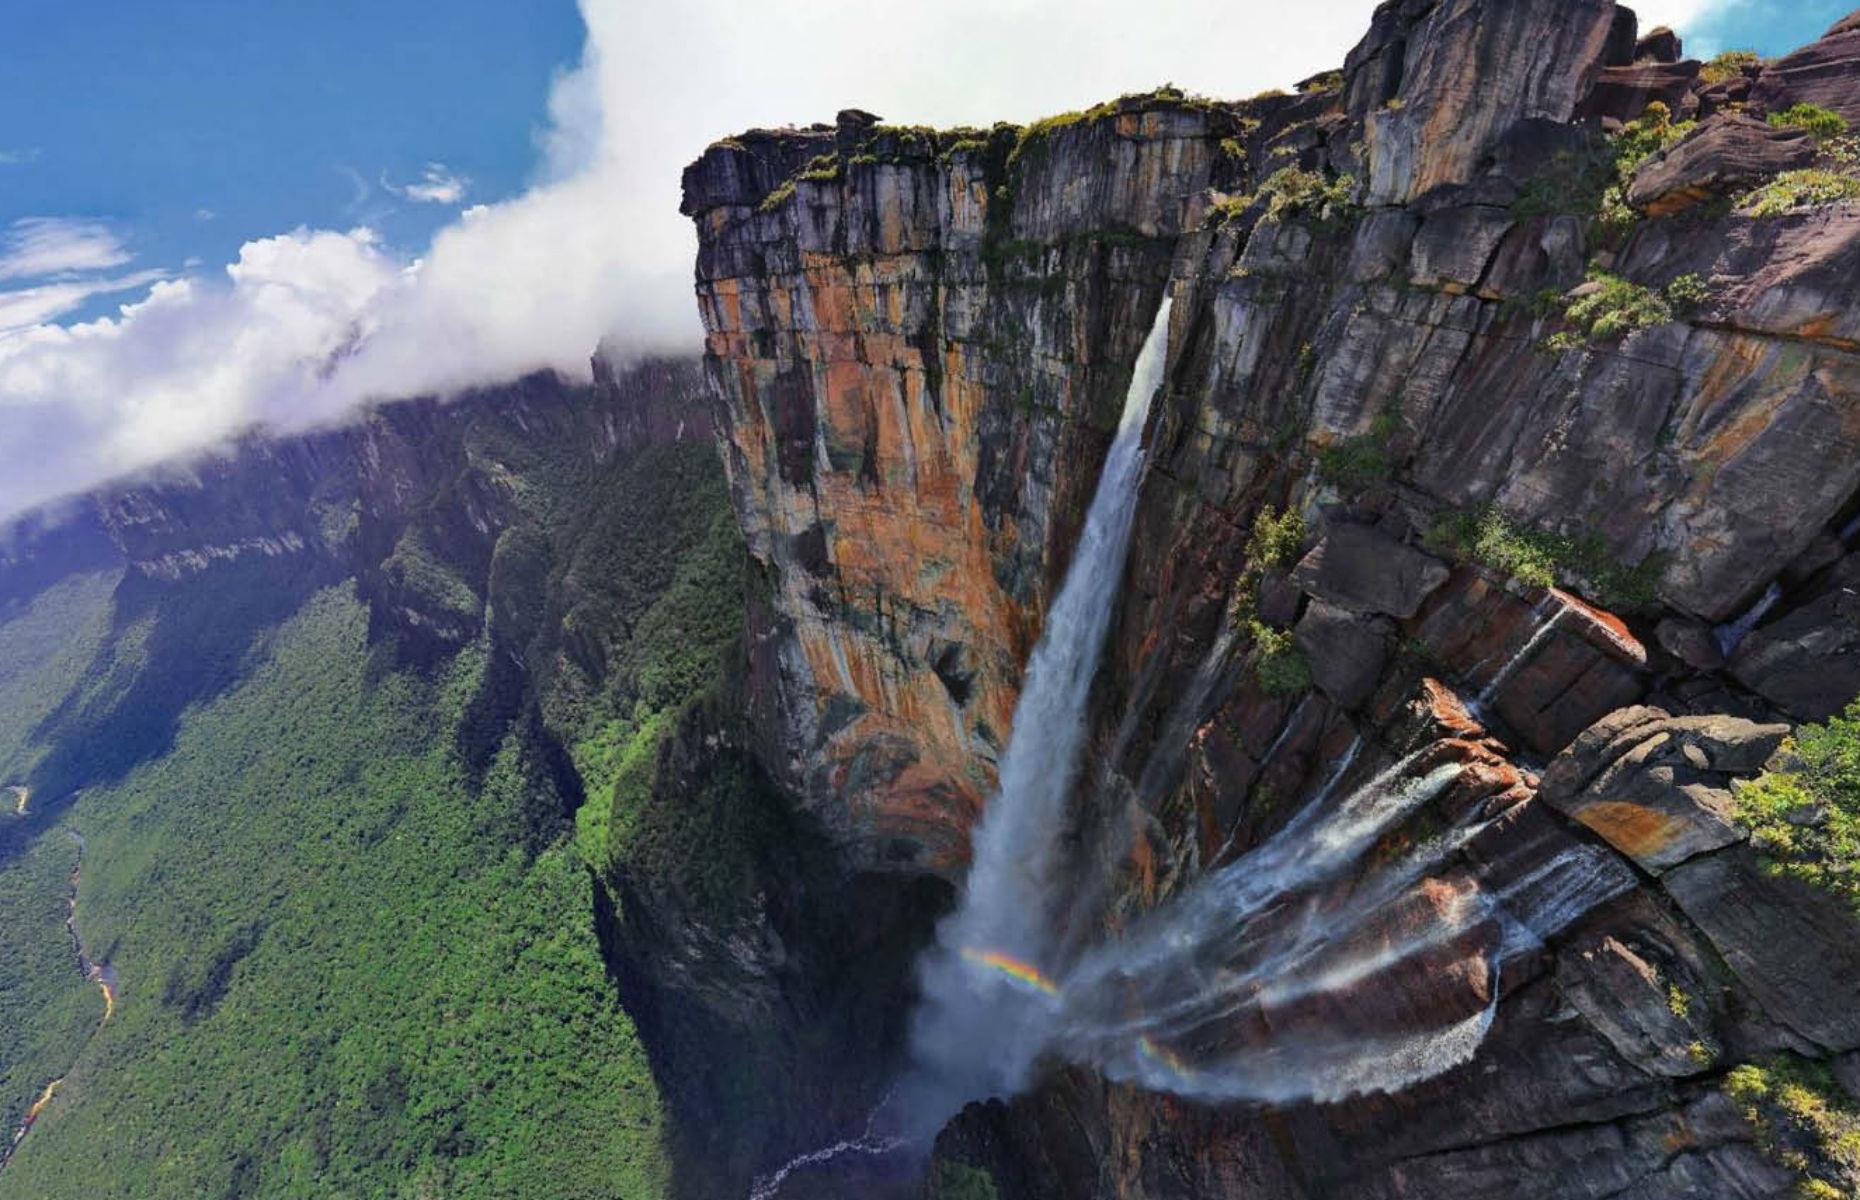 <p>Thrill-seekers can't pick a much more high-octane adventure than climbing the tabletop mountain of Auyan-tepui and abseiling down the world’s highest waterfall, Angel Falls. Fifteen times higher than Niagara, and without the hordes of tourists, the waterfall, also called Kerepakupai Meru, is only witnessed by a few lucky travelers every year due to its remote location. Climb up to the summit and enjoy the vertiginous, two-day descent down the 3,200-foot falls <a href="https://secretcompass.com/expedition/venezuela-abseil-angel-falls-expedition/">on a 14-day tour</a>.</p>